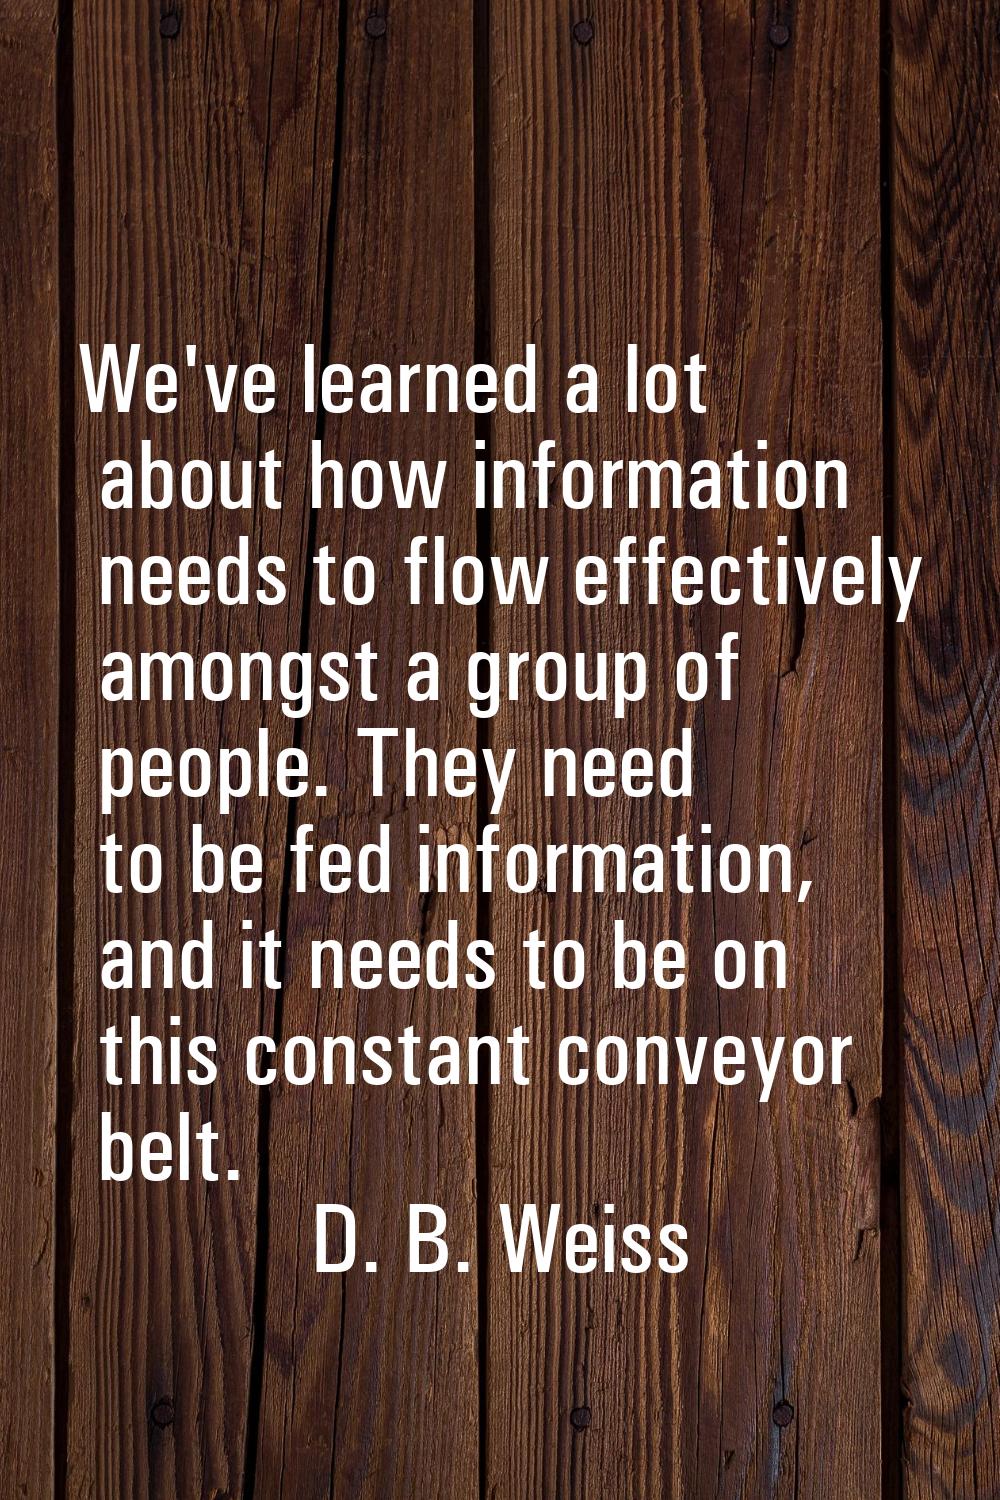 We've learned a lot about how information needs to flow effectively amongst a group of people. They